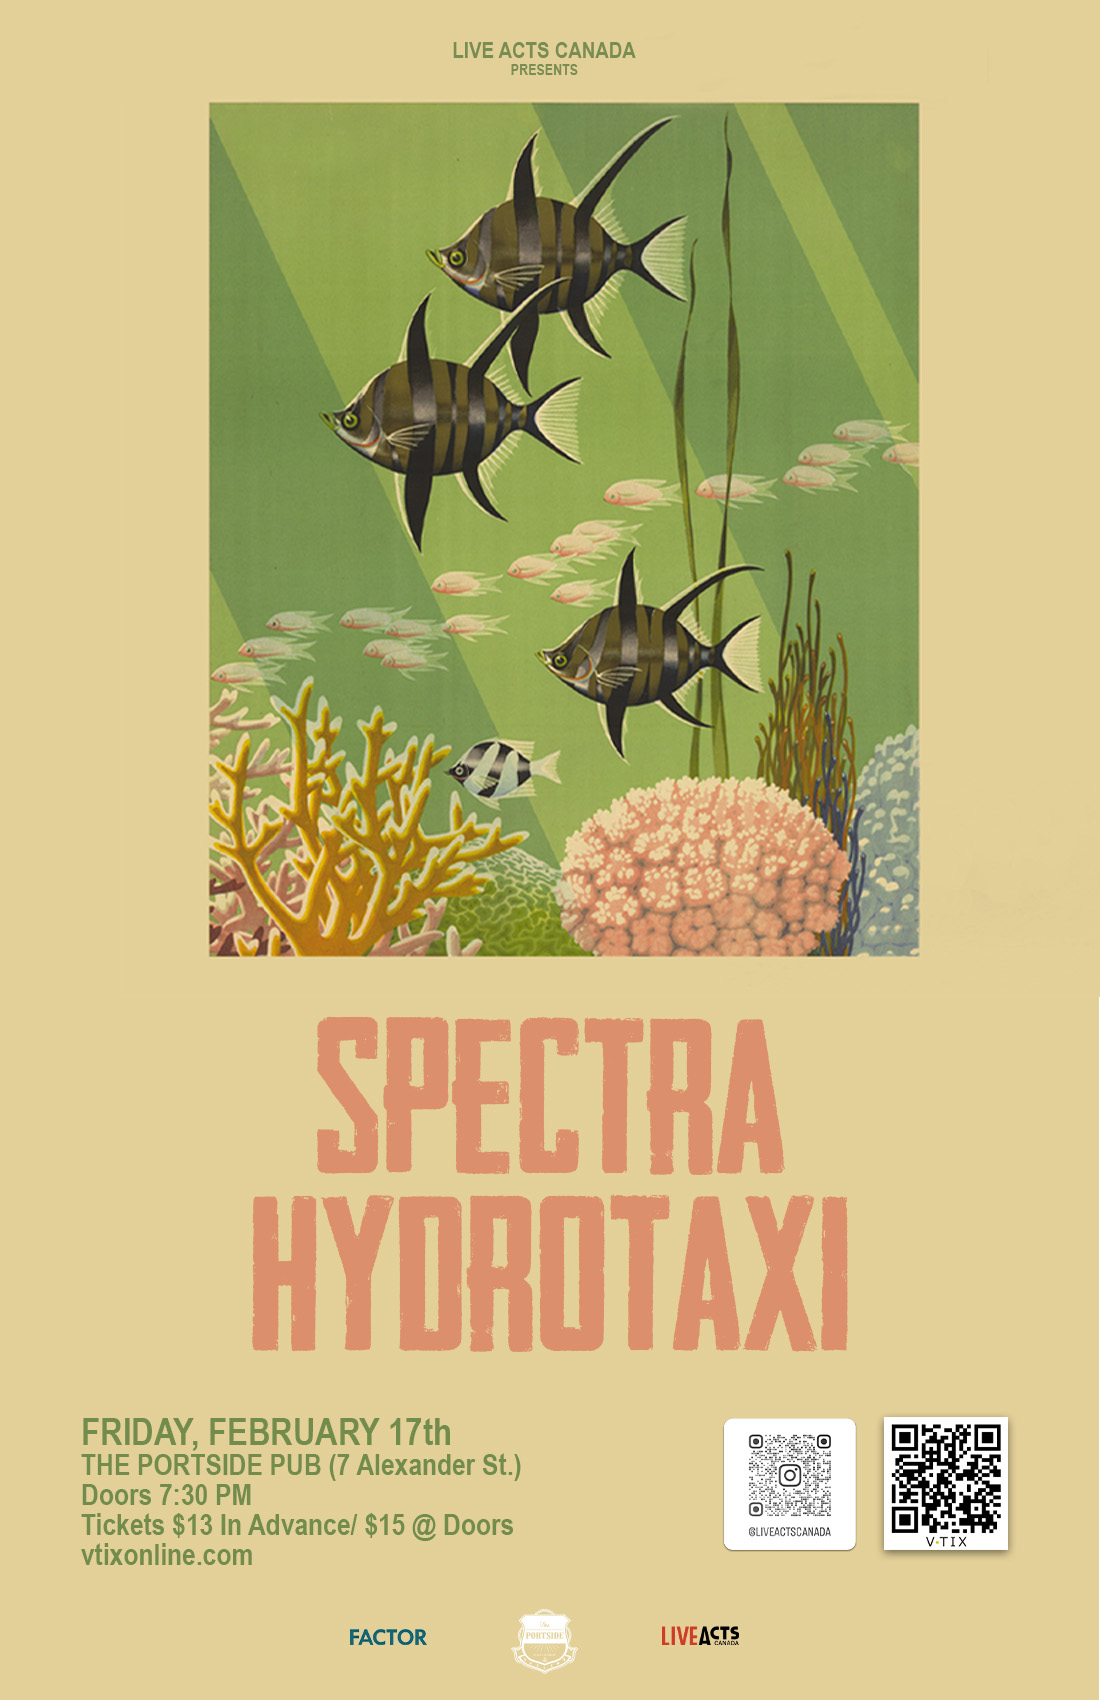 Spectra With Special Guest Hydrotaxi